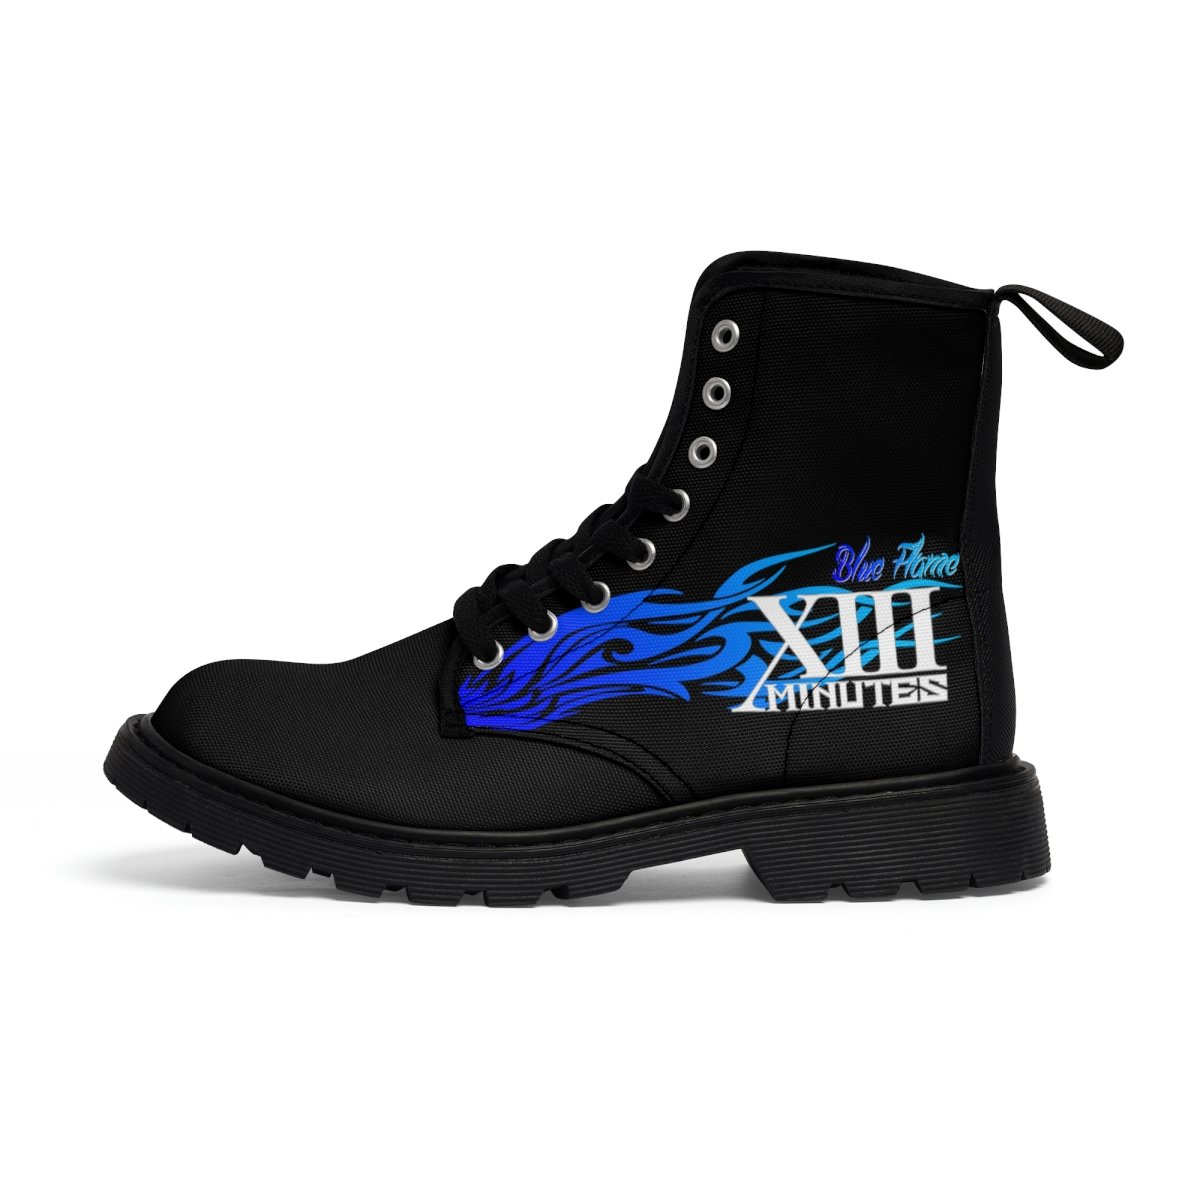 XIII Minutes Blue Flame Women’s Boots